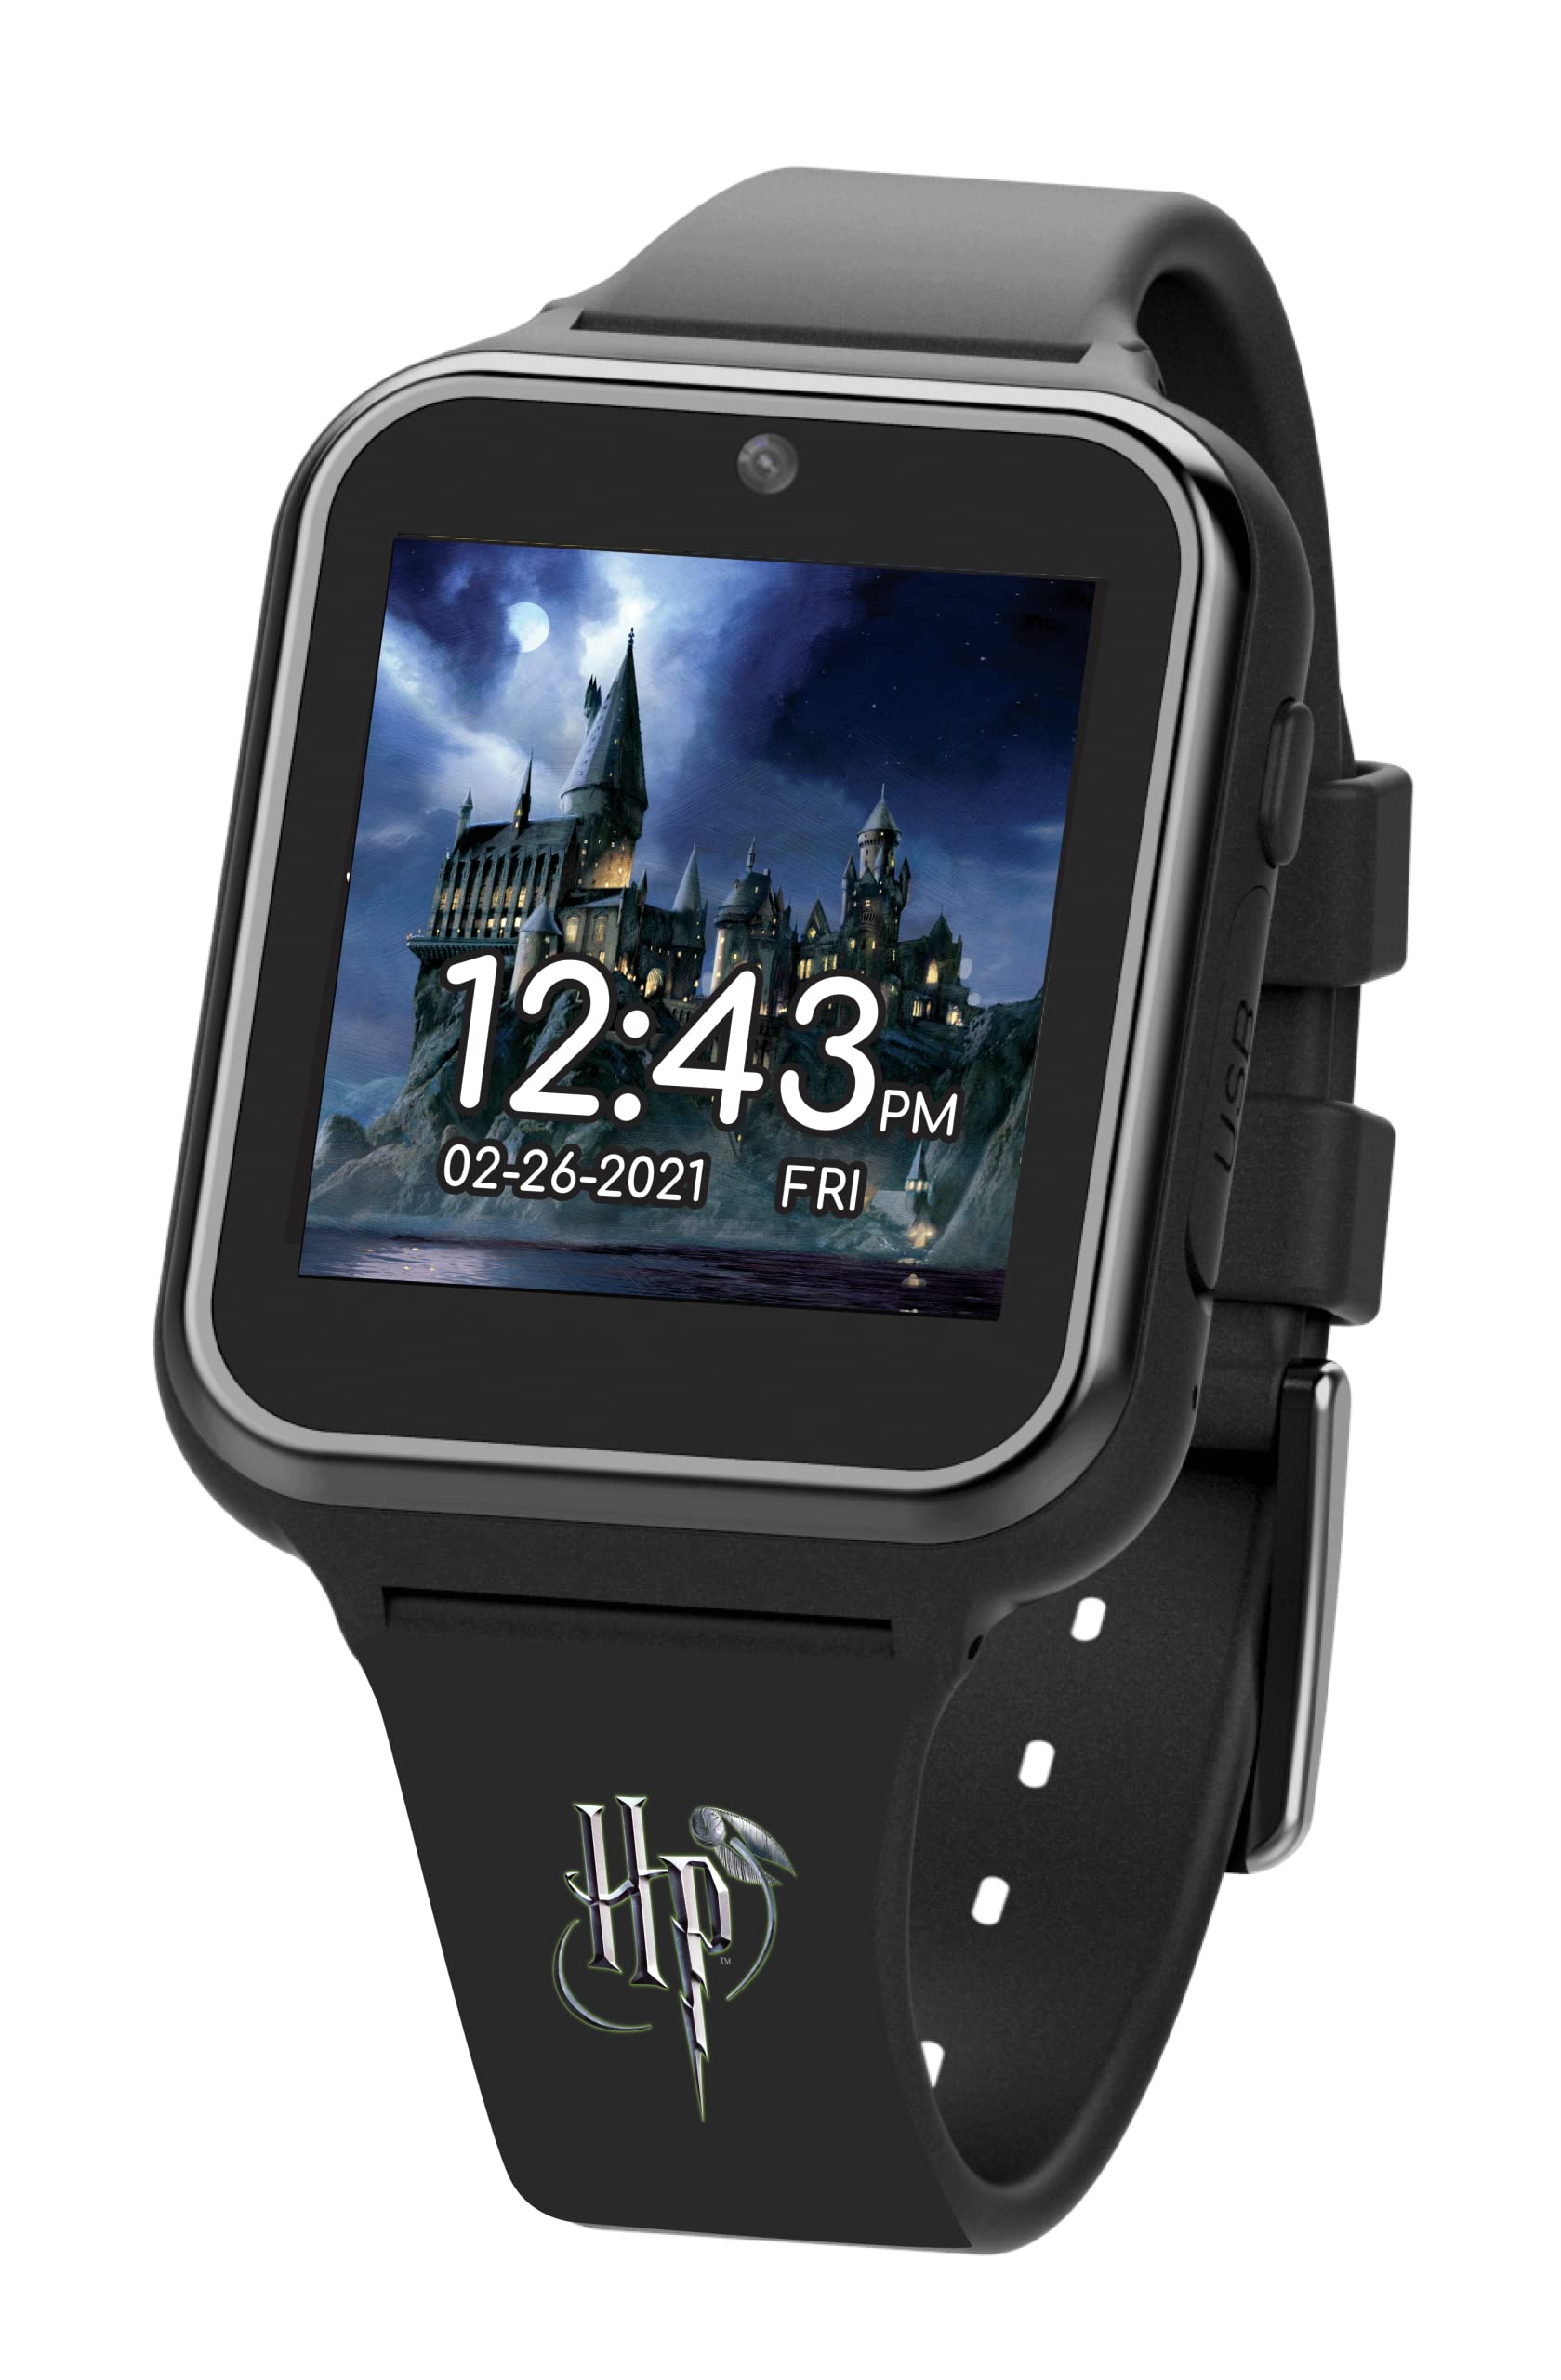 Accutime Kids Harry Potter Educational Learning Touchscreen Black Smart Watch Toy with Black Strap for Girls, Boys, Toddlers - Selfie Cam, Games, Alarm, Calculator, Pedometer (Model: HP4096AZ)